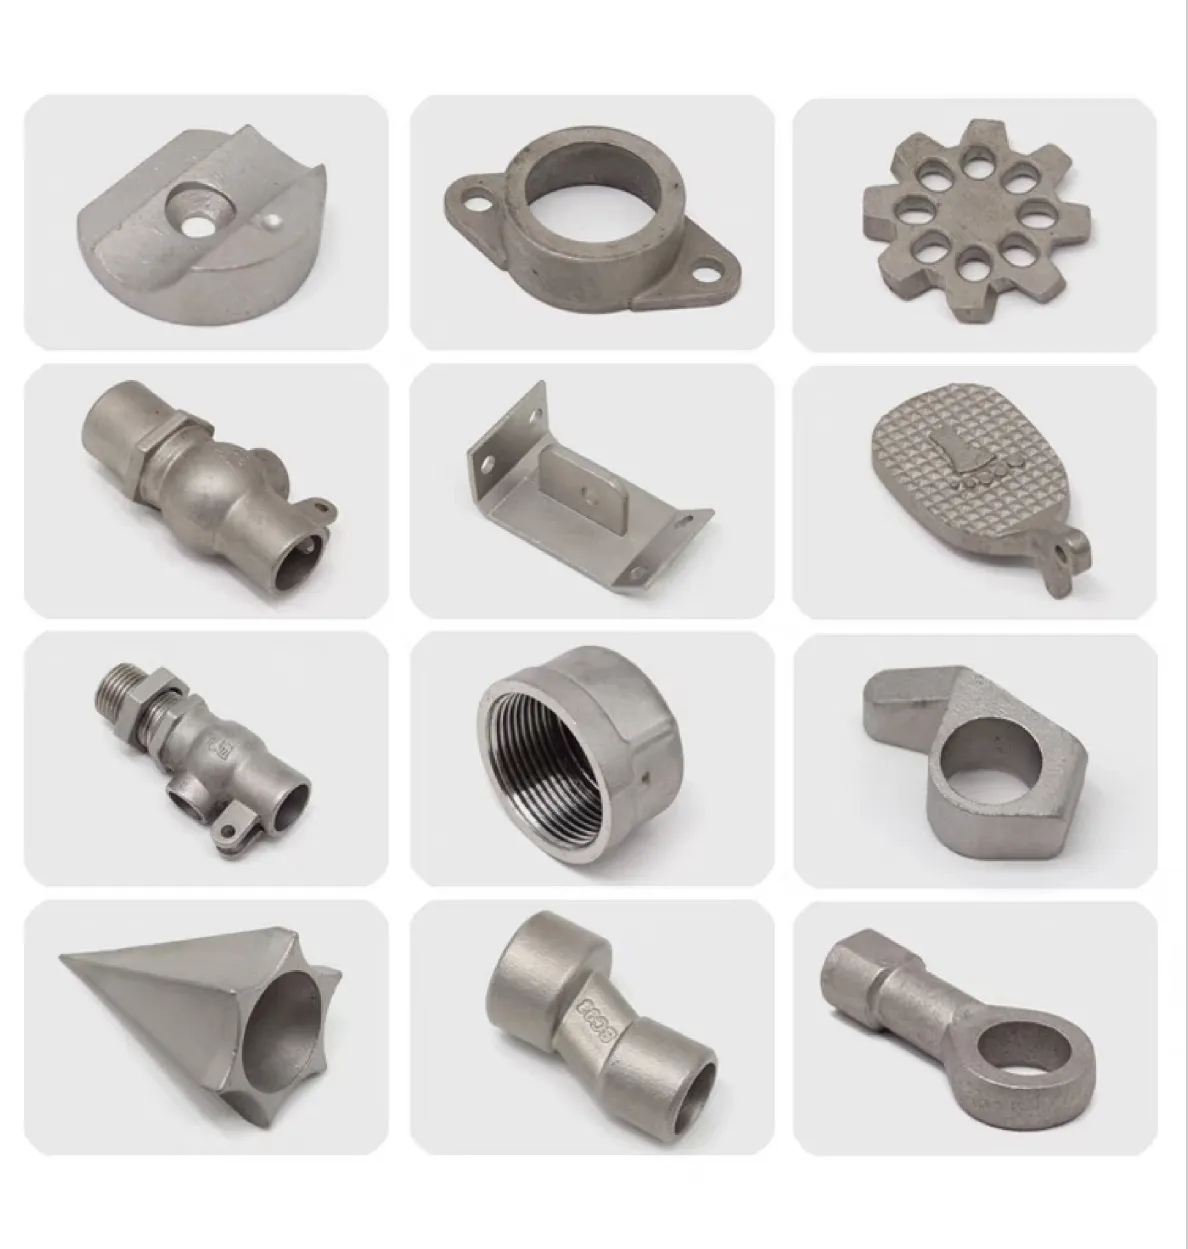 CNC custom turning and milling parts 5-axis titanium Machining Spinning Accessories with wire edm service